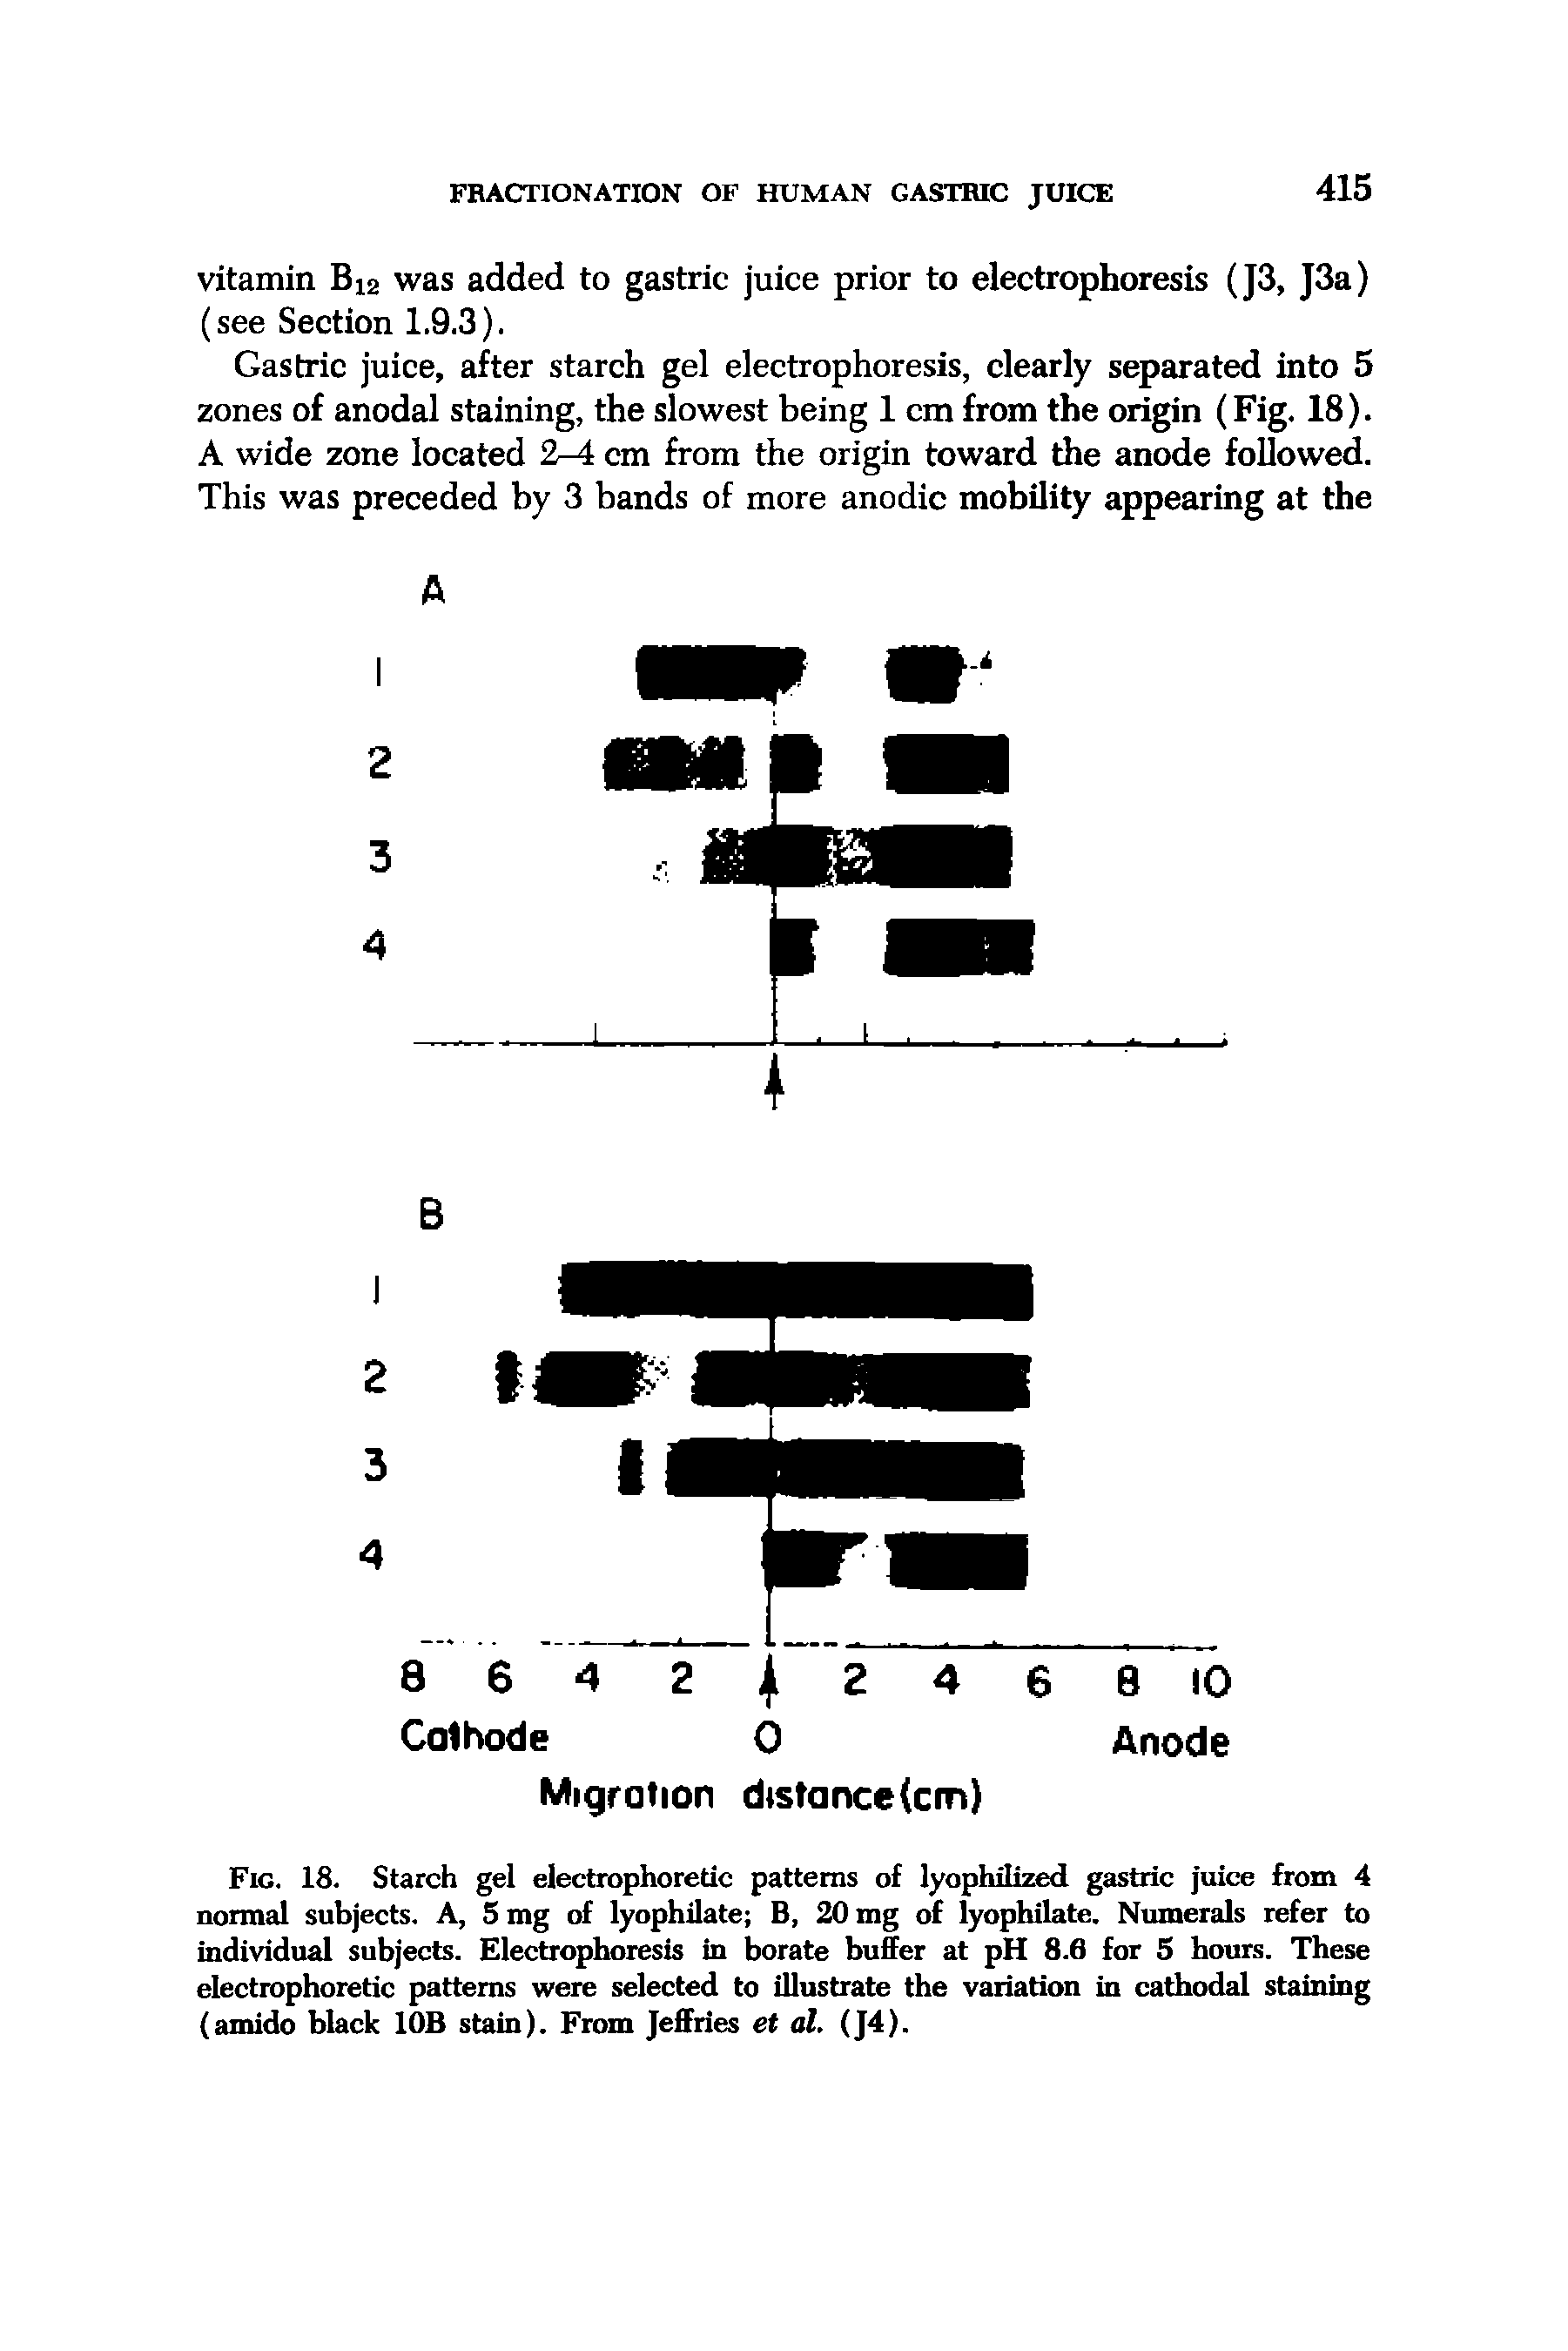 Fig. 18. Starch gel electrophoretic patterns of lyophilized gastric juice from 4 normal subjects. A, 5 mg of lyophilate B, 20 mg of lyophilate. Numerals refer to individual subjects. Electrophoresis in borate buffer at pH 8.6 for 5 hours. These electrophoretic patterns were selected to illustrate the variation in cathodal staining (amido black lOB stain). From Jeffries et al. (J4).